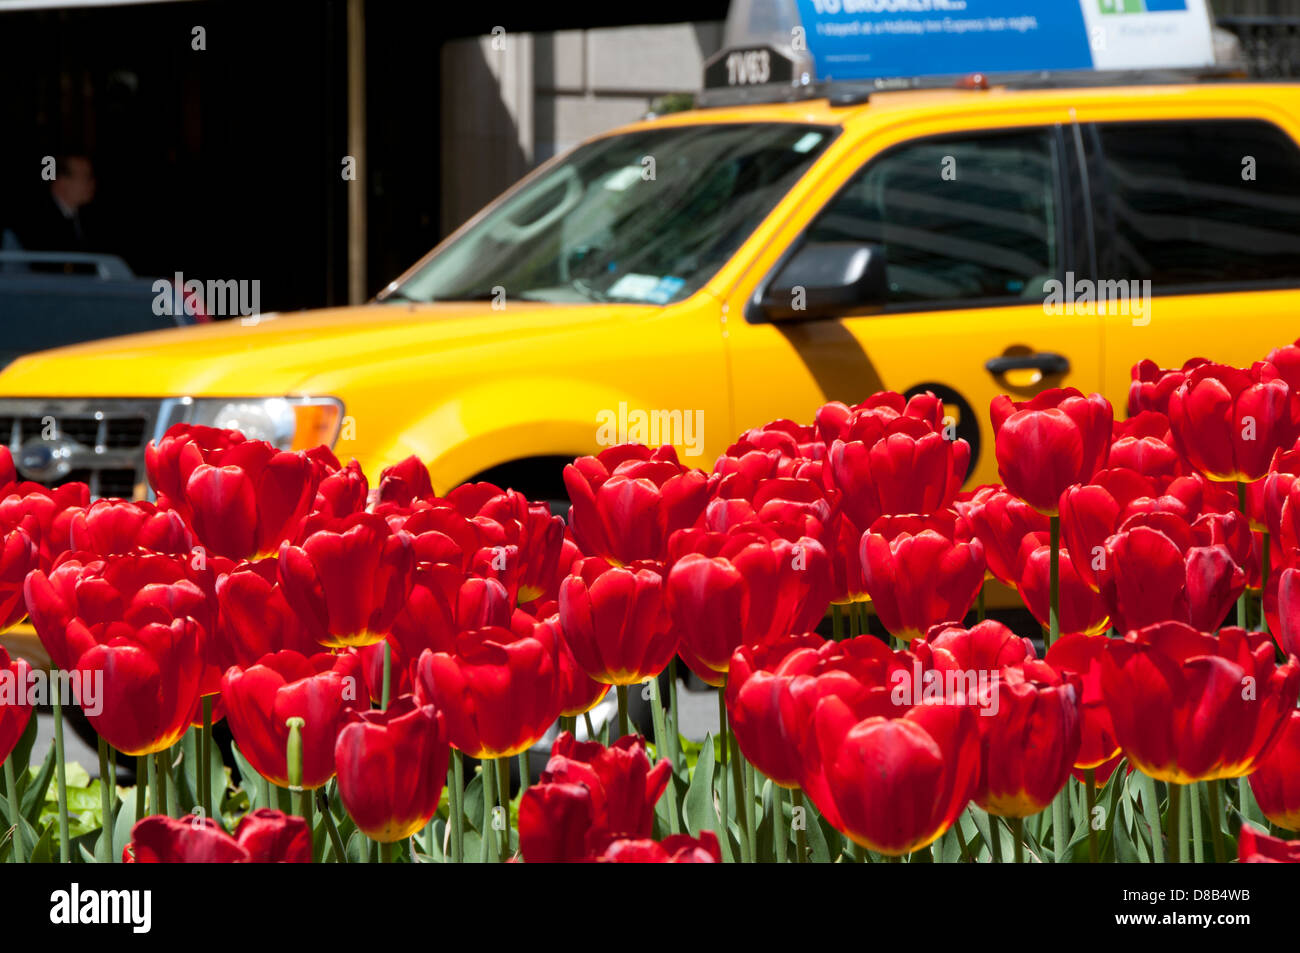 Tulipes rouges NYC taxi taxi médian Banque D'Images